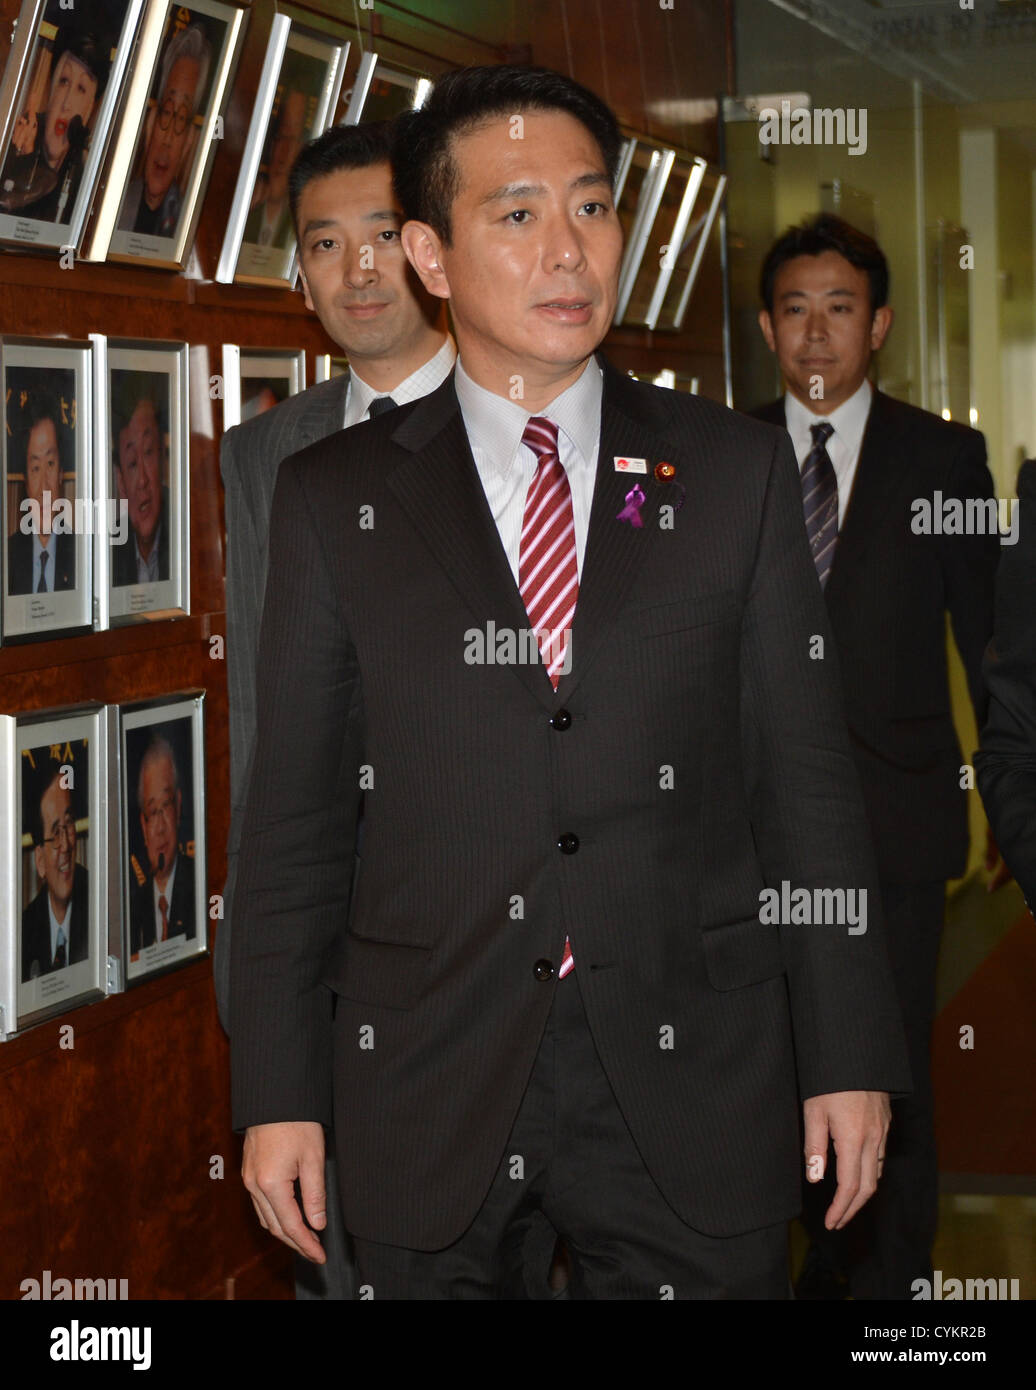 November 7, 2012, Tokyo, Japan - Japan's Economics Minister Seiji Maehara arrives for a news conference at Tokyo's Foreign Correspondents' Club of Japan on Wednesday, November 7, 2012. Maehara said Japan's economic situation needs powerful monetary easing in its fight against deflation.  (Photo by Natsuki Sakai/AFLO) AYF -mis- Stock Photo